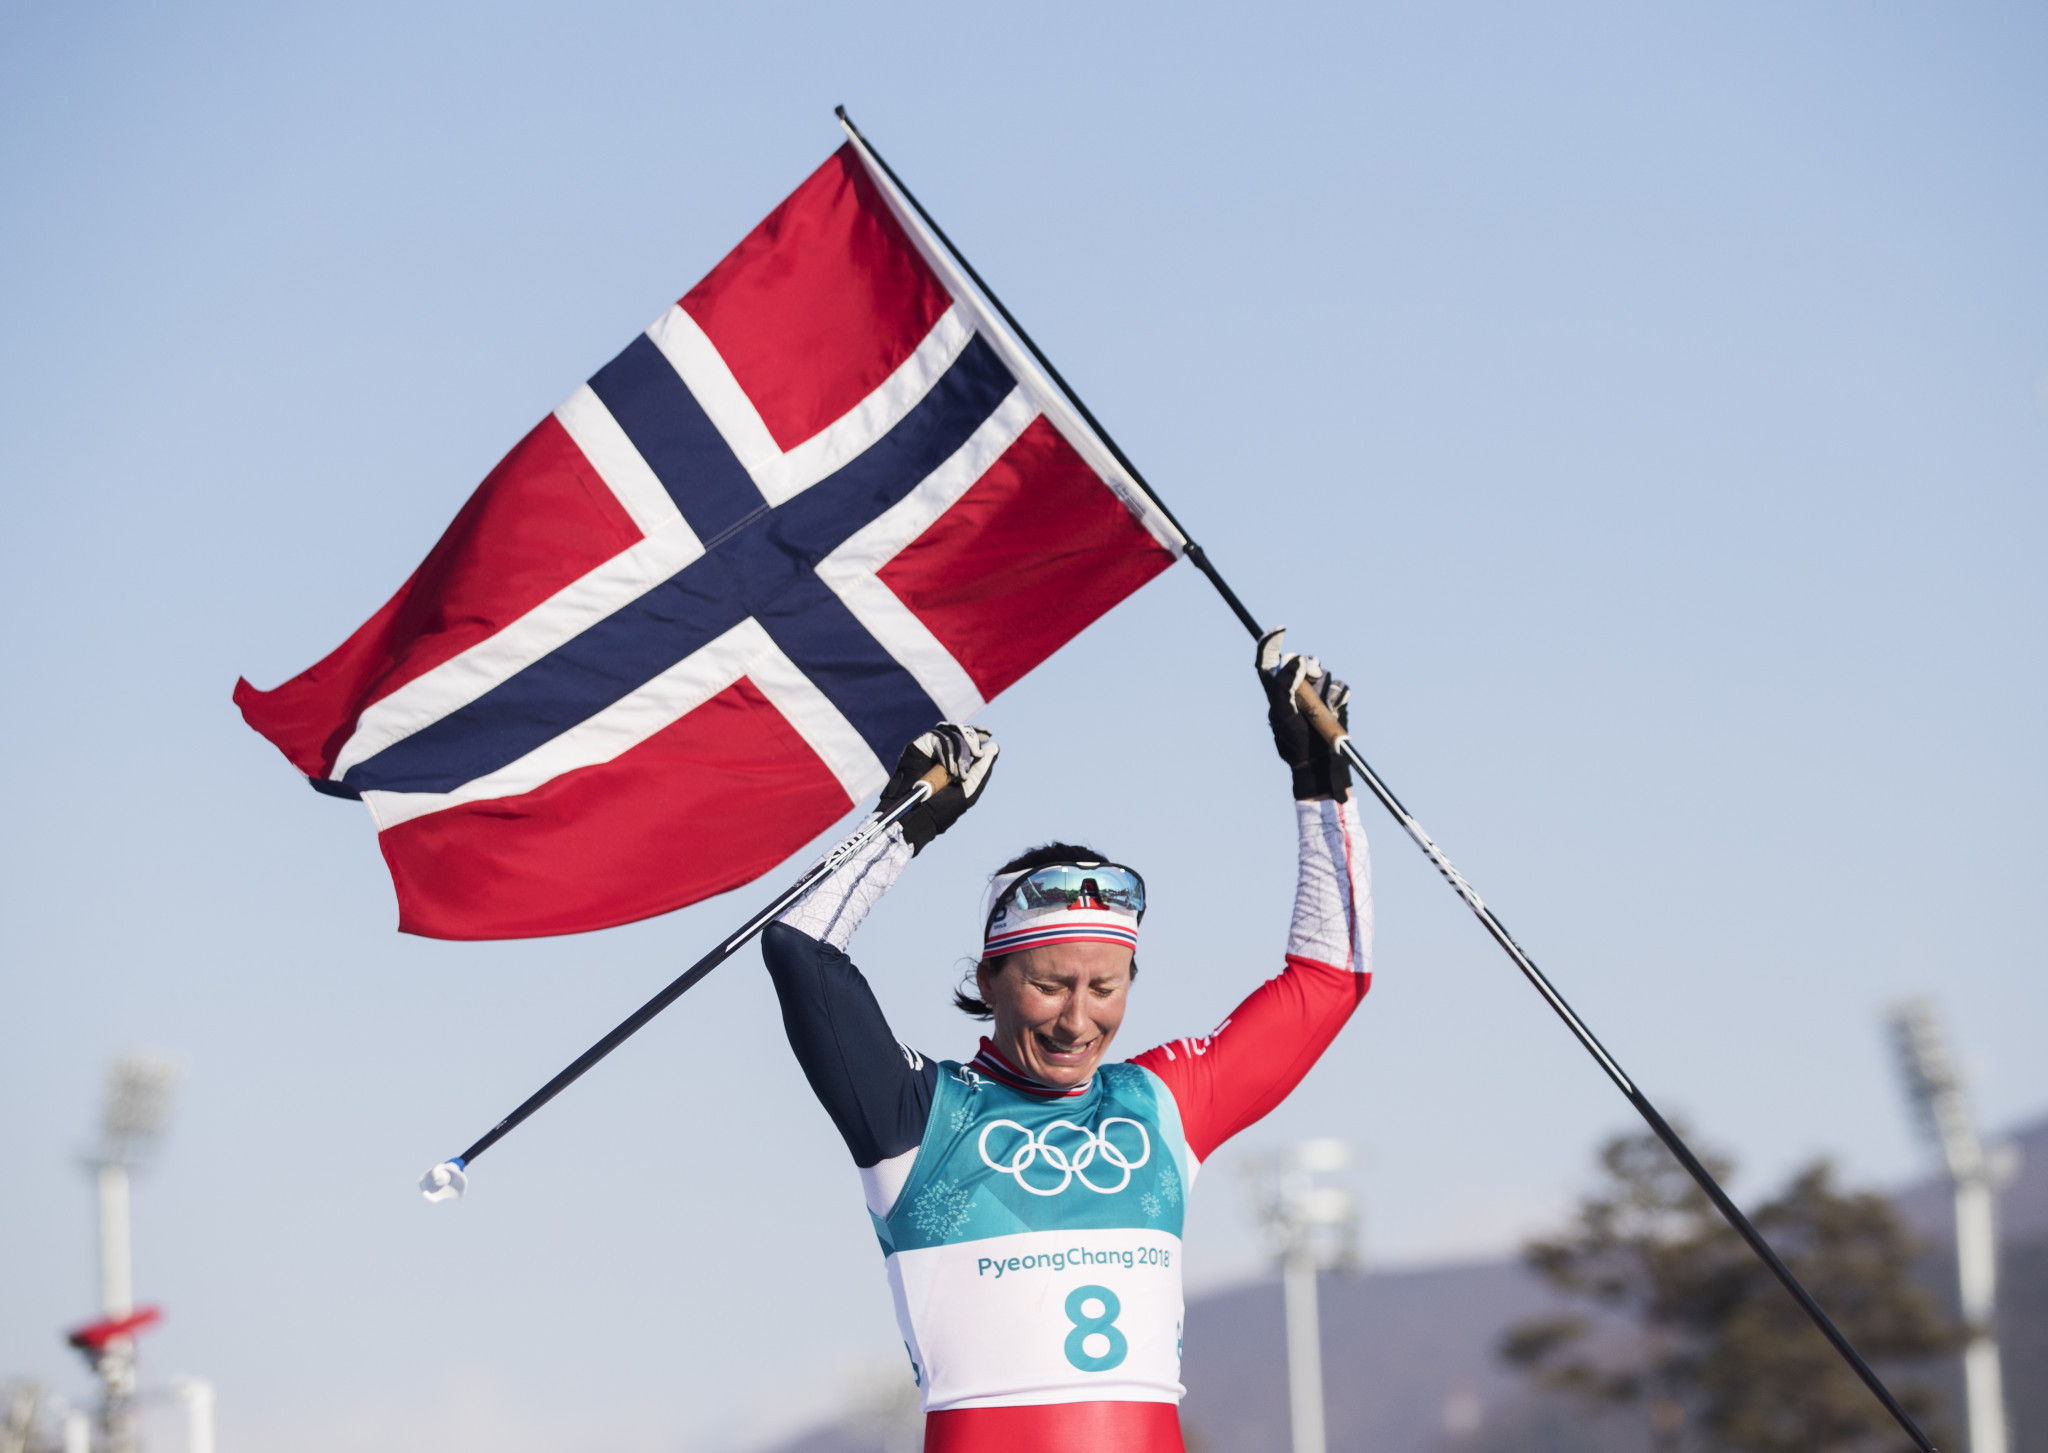 Norway is again predicted to top the medals table ©Getty Images 